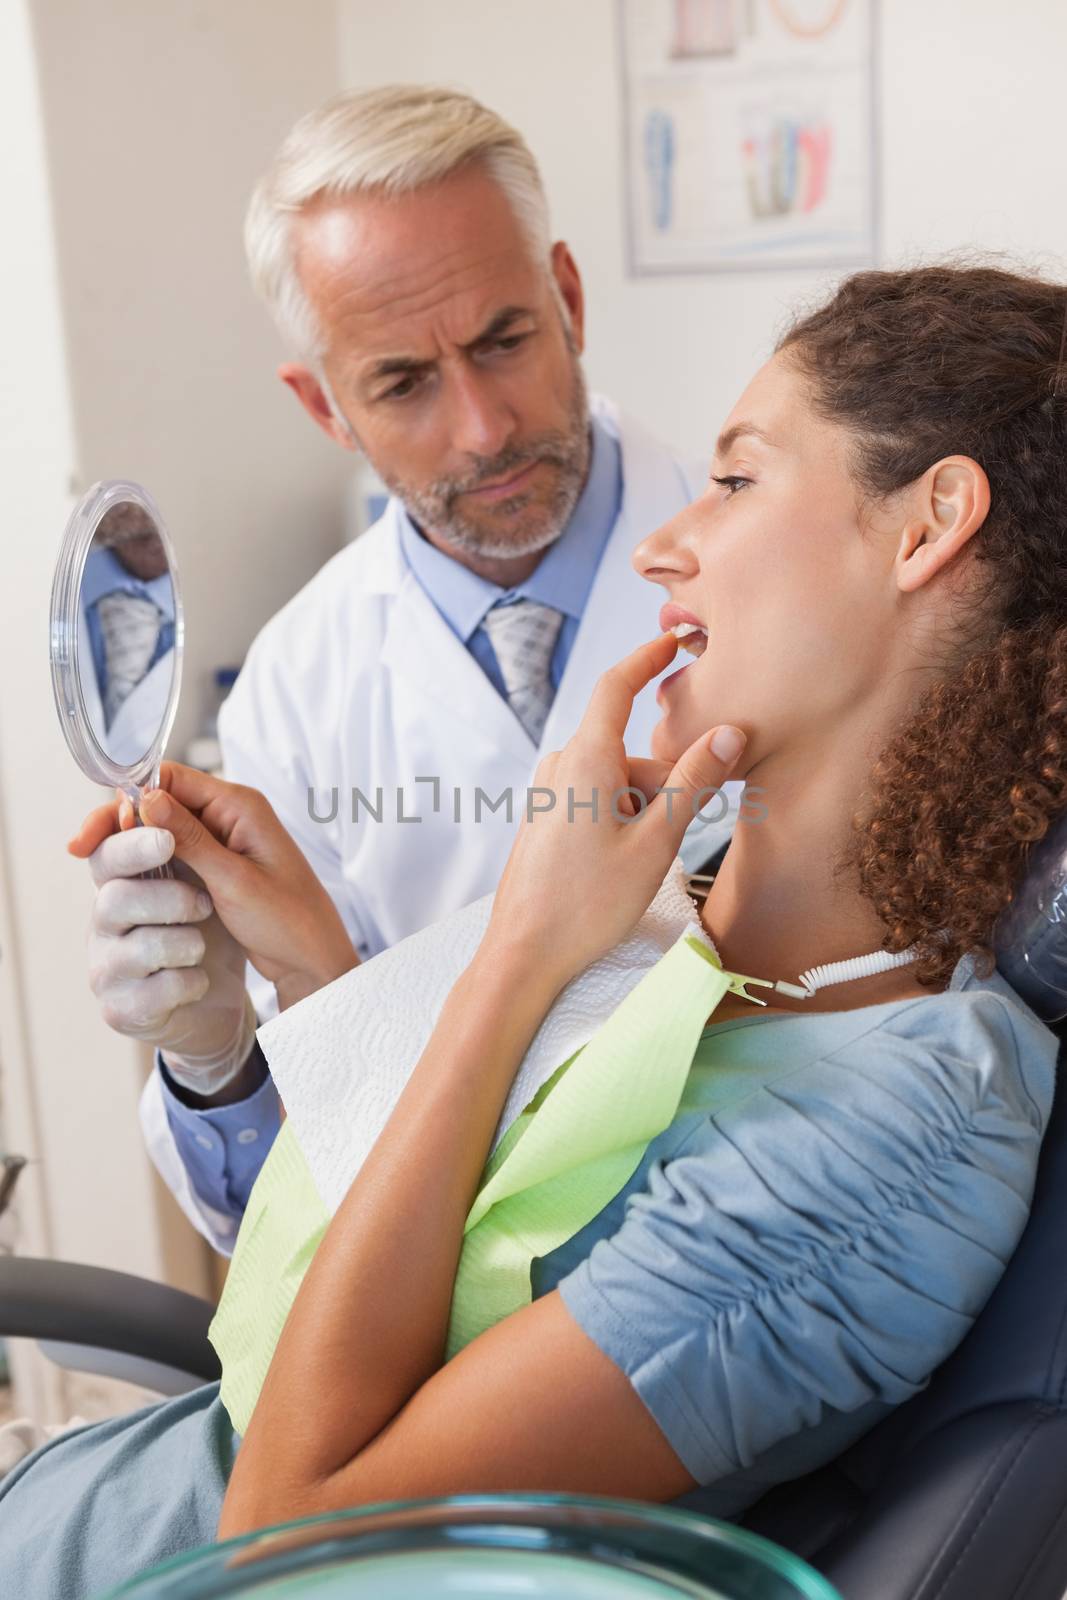 Patient showing dentist the problem in the mirror by Wavebreakmedia